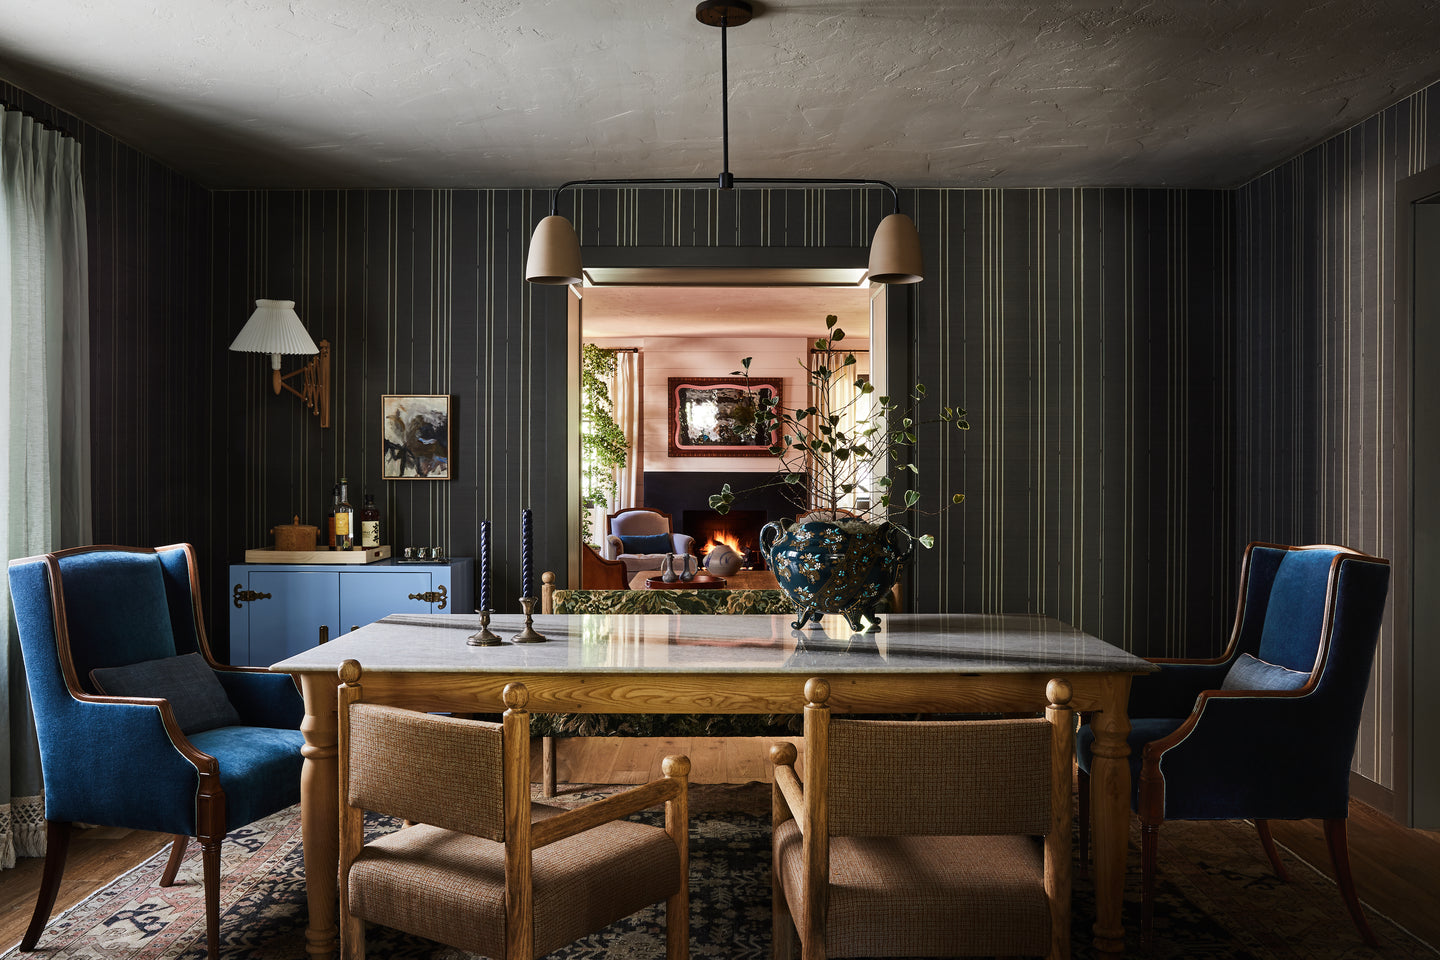 Moody-Dining-Room-Grasscloth-Toluca-Stripe-Wallpaper-With-Martin-Brockett-Lawson-Fenning-Kelly-Wearstler-Clarence-House-Seen-In-Architectural-Digest-Home-Of-Lauren-Morelli-Samira-Wiley-Los-Angeles-Home